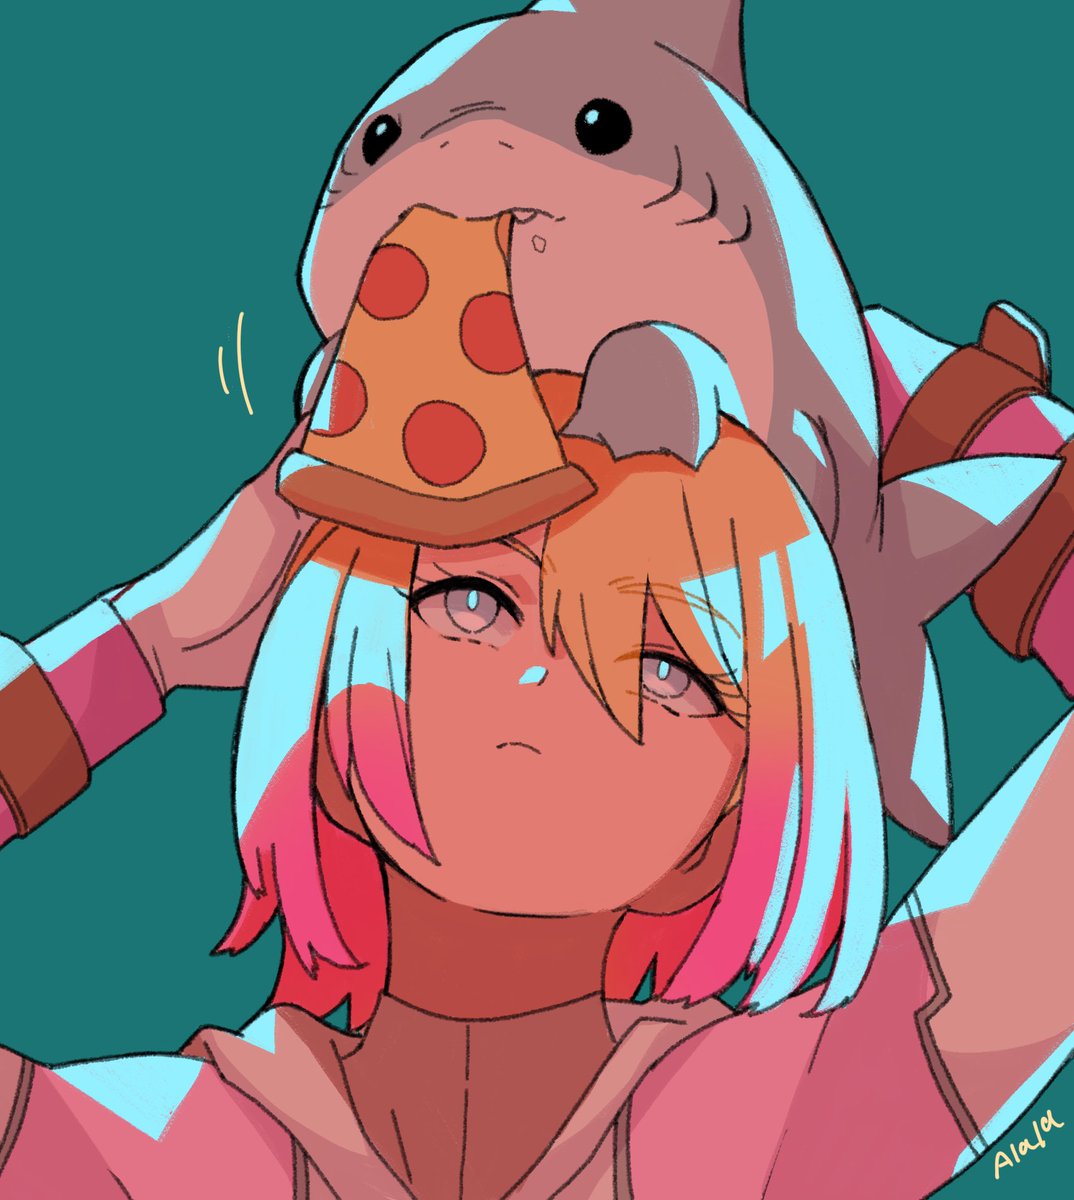 「poole&jeff 」|あらら🍣🍕のイラスト